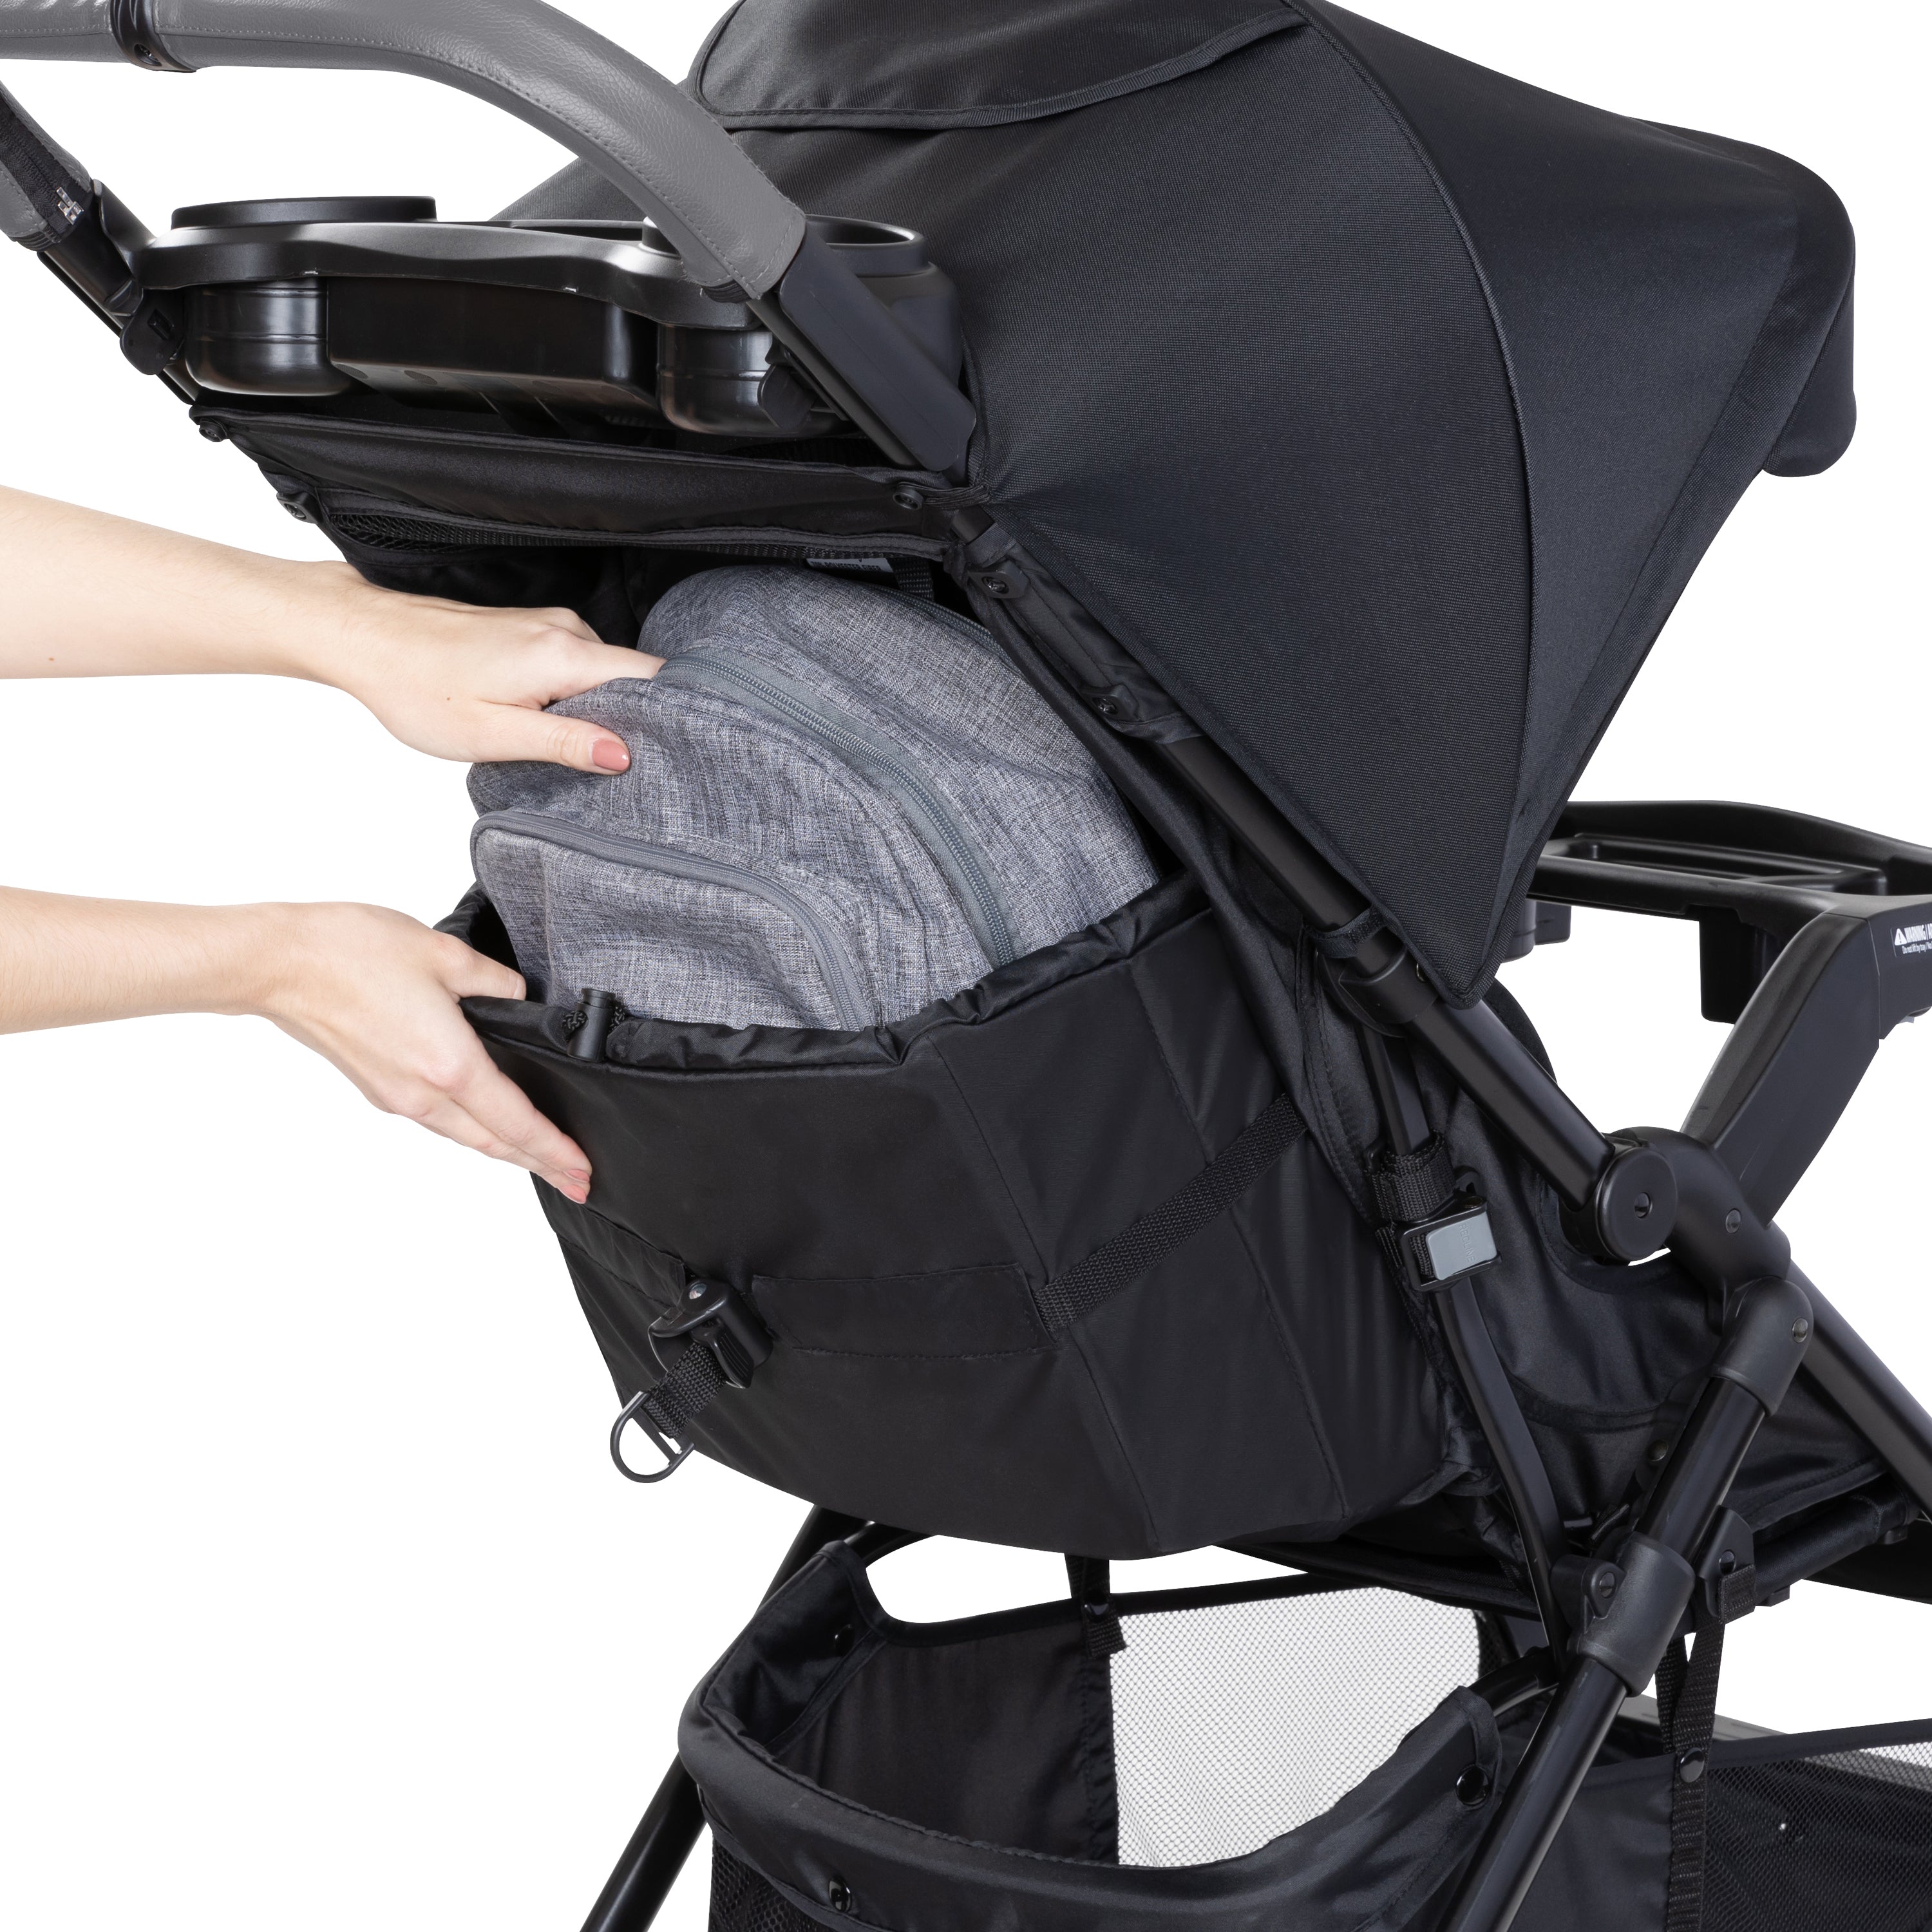 Stroller Straps, Secure & Stylish Baby Accessories